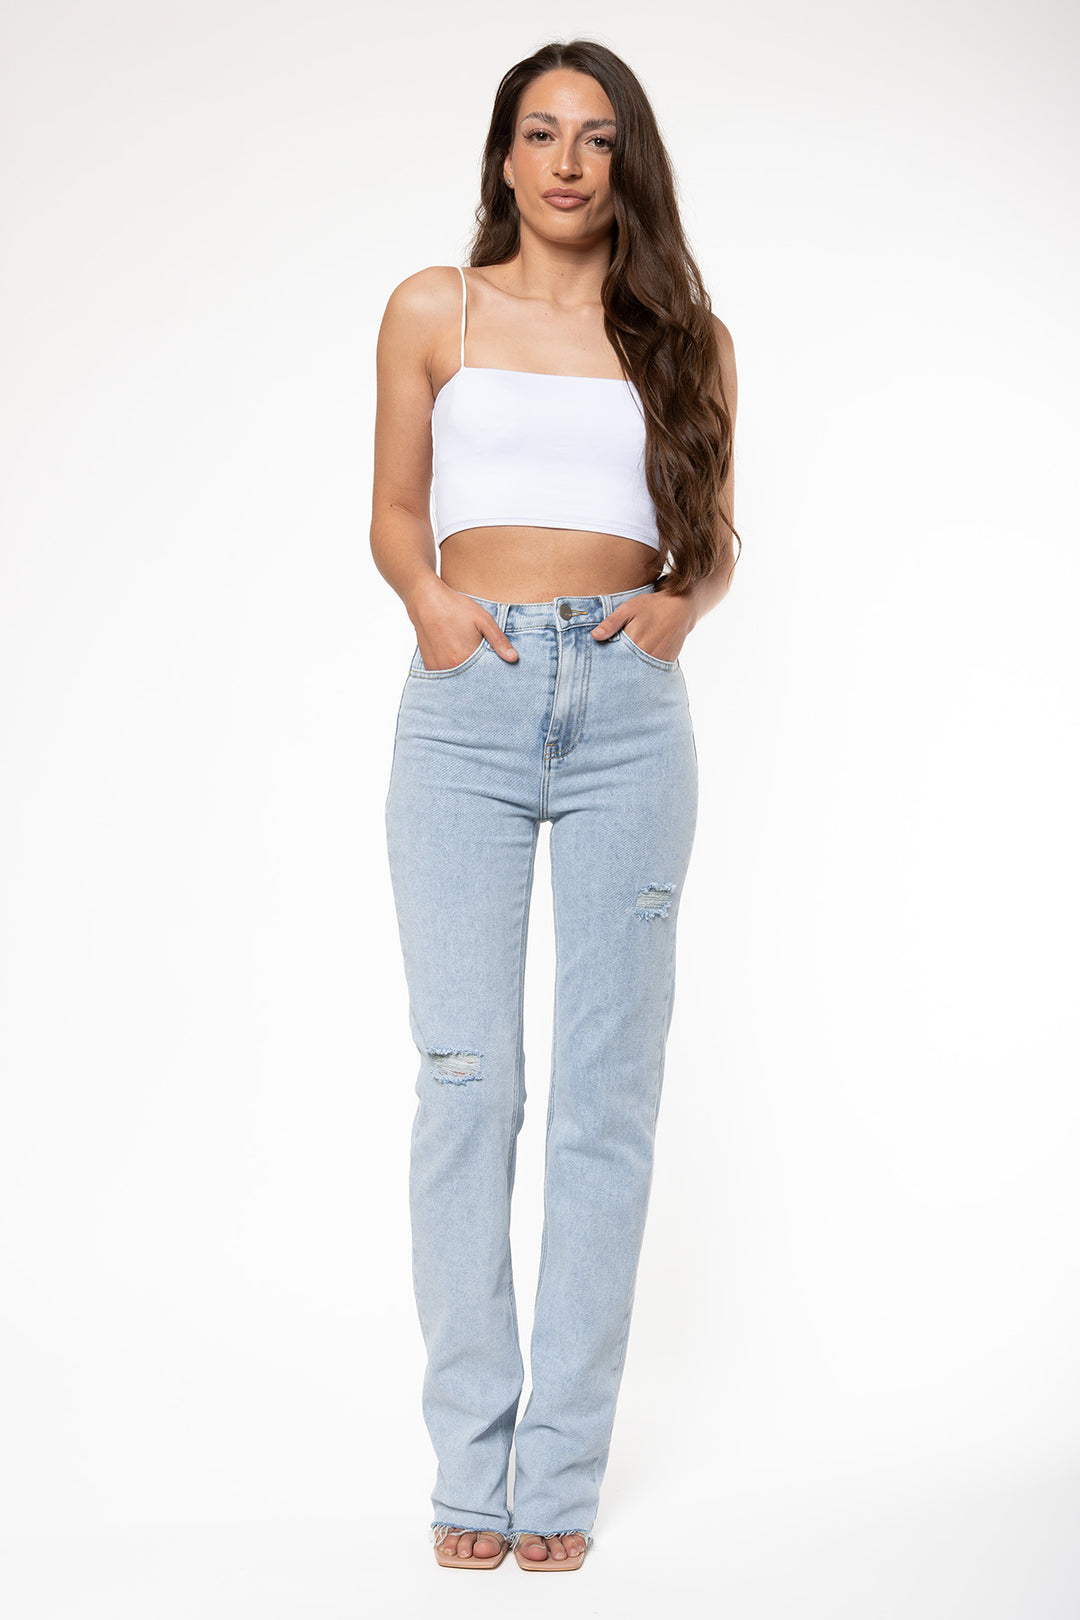 Harper Stretch Straight Leg Jeans - EXTRA TALL Jeans Routines Fashion   